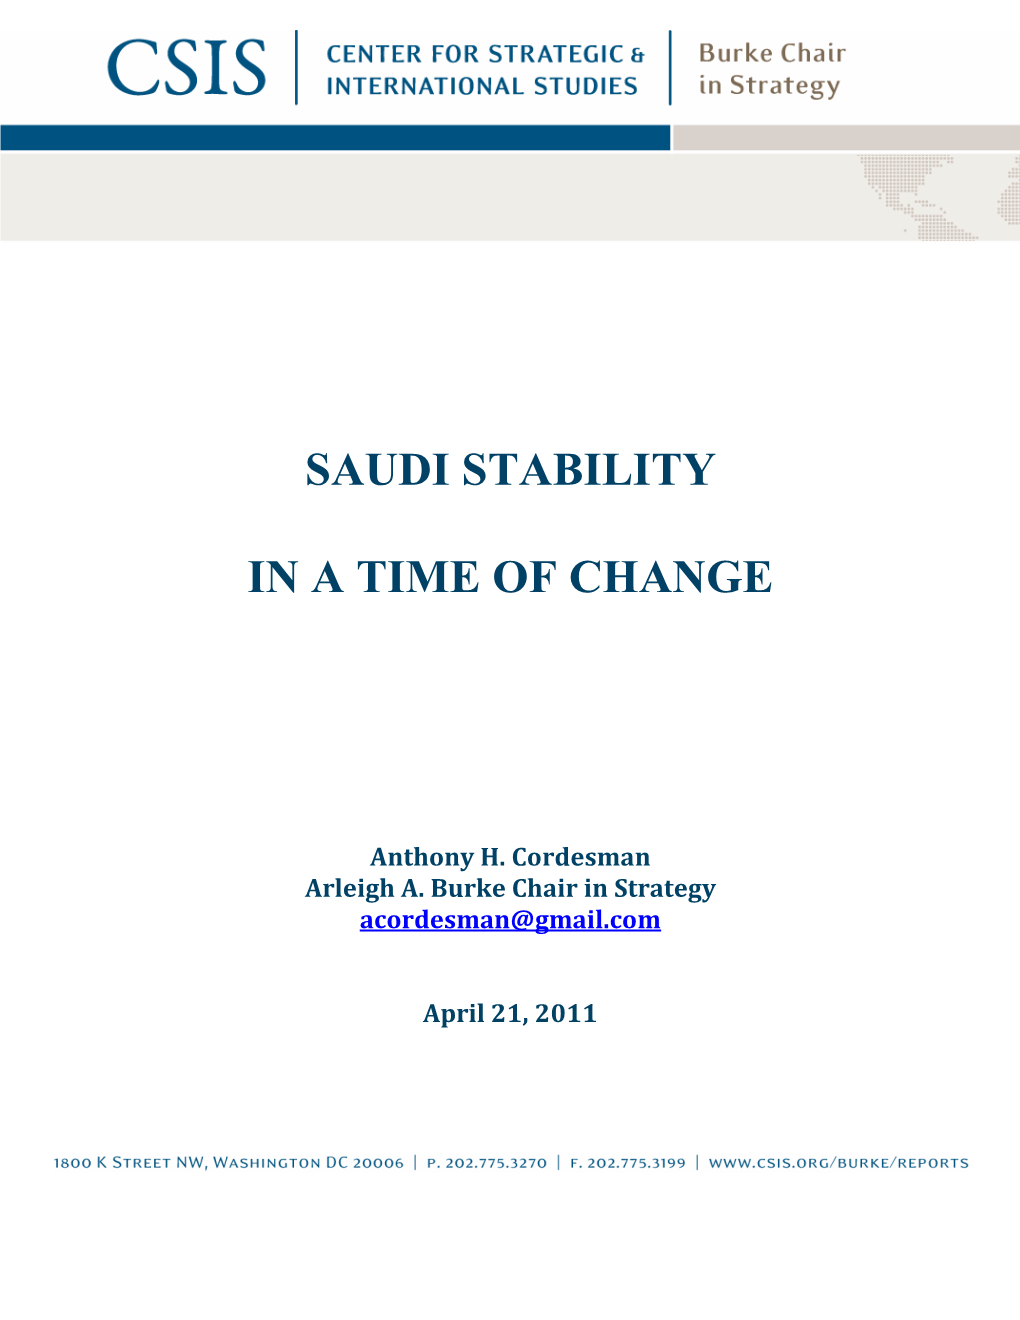 Saudi Stability in a Time of Change